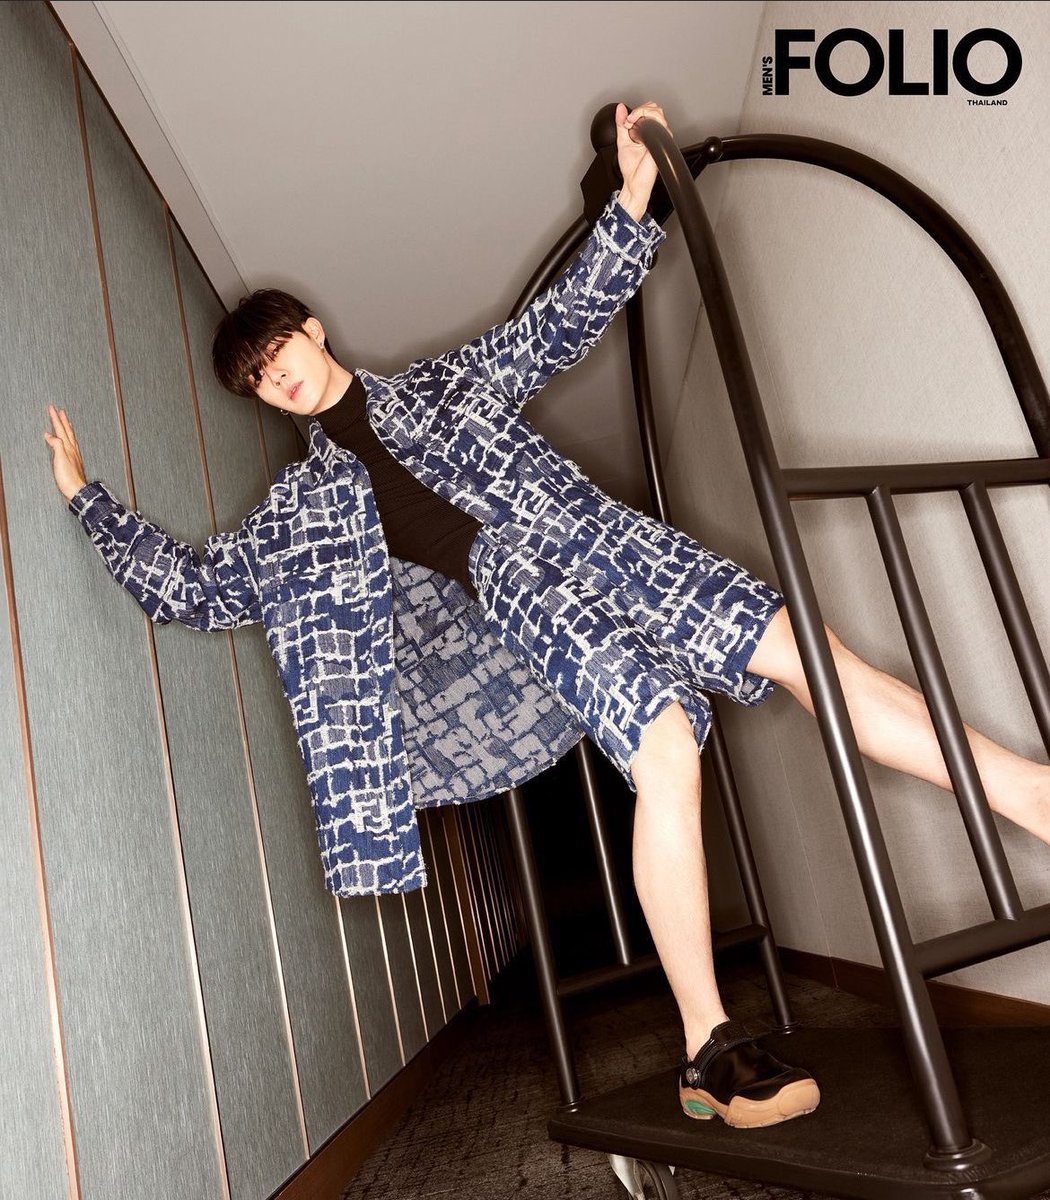 His 80% legs and 20% upper body??? That angle captured his femur and tibia is so giving